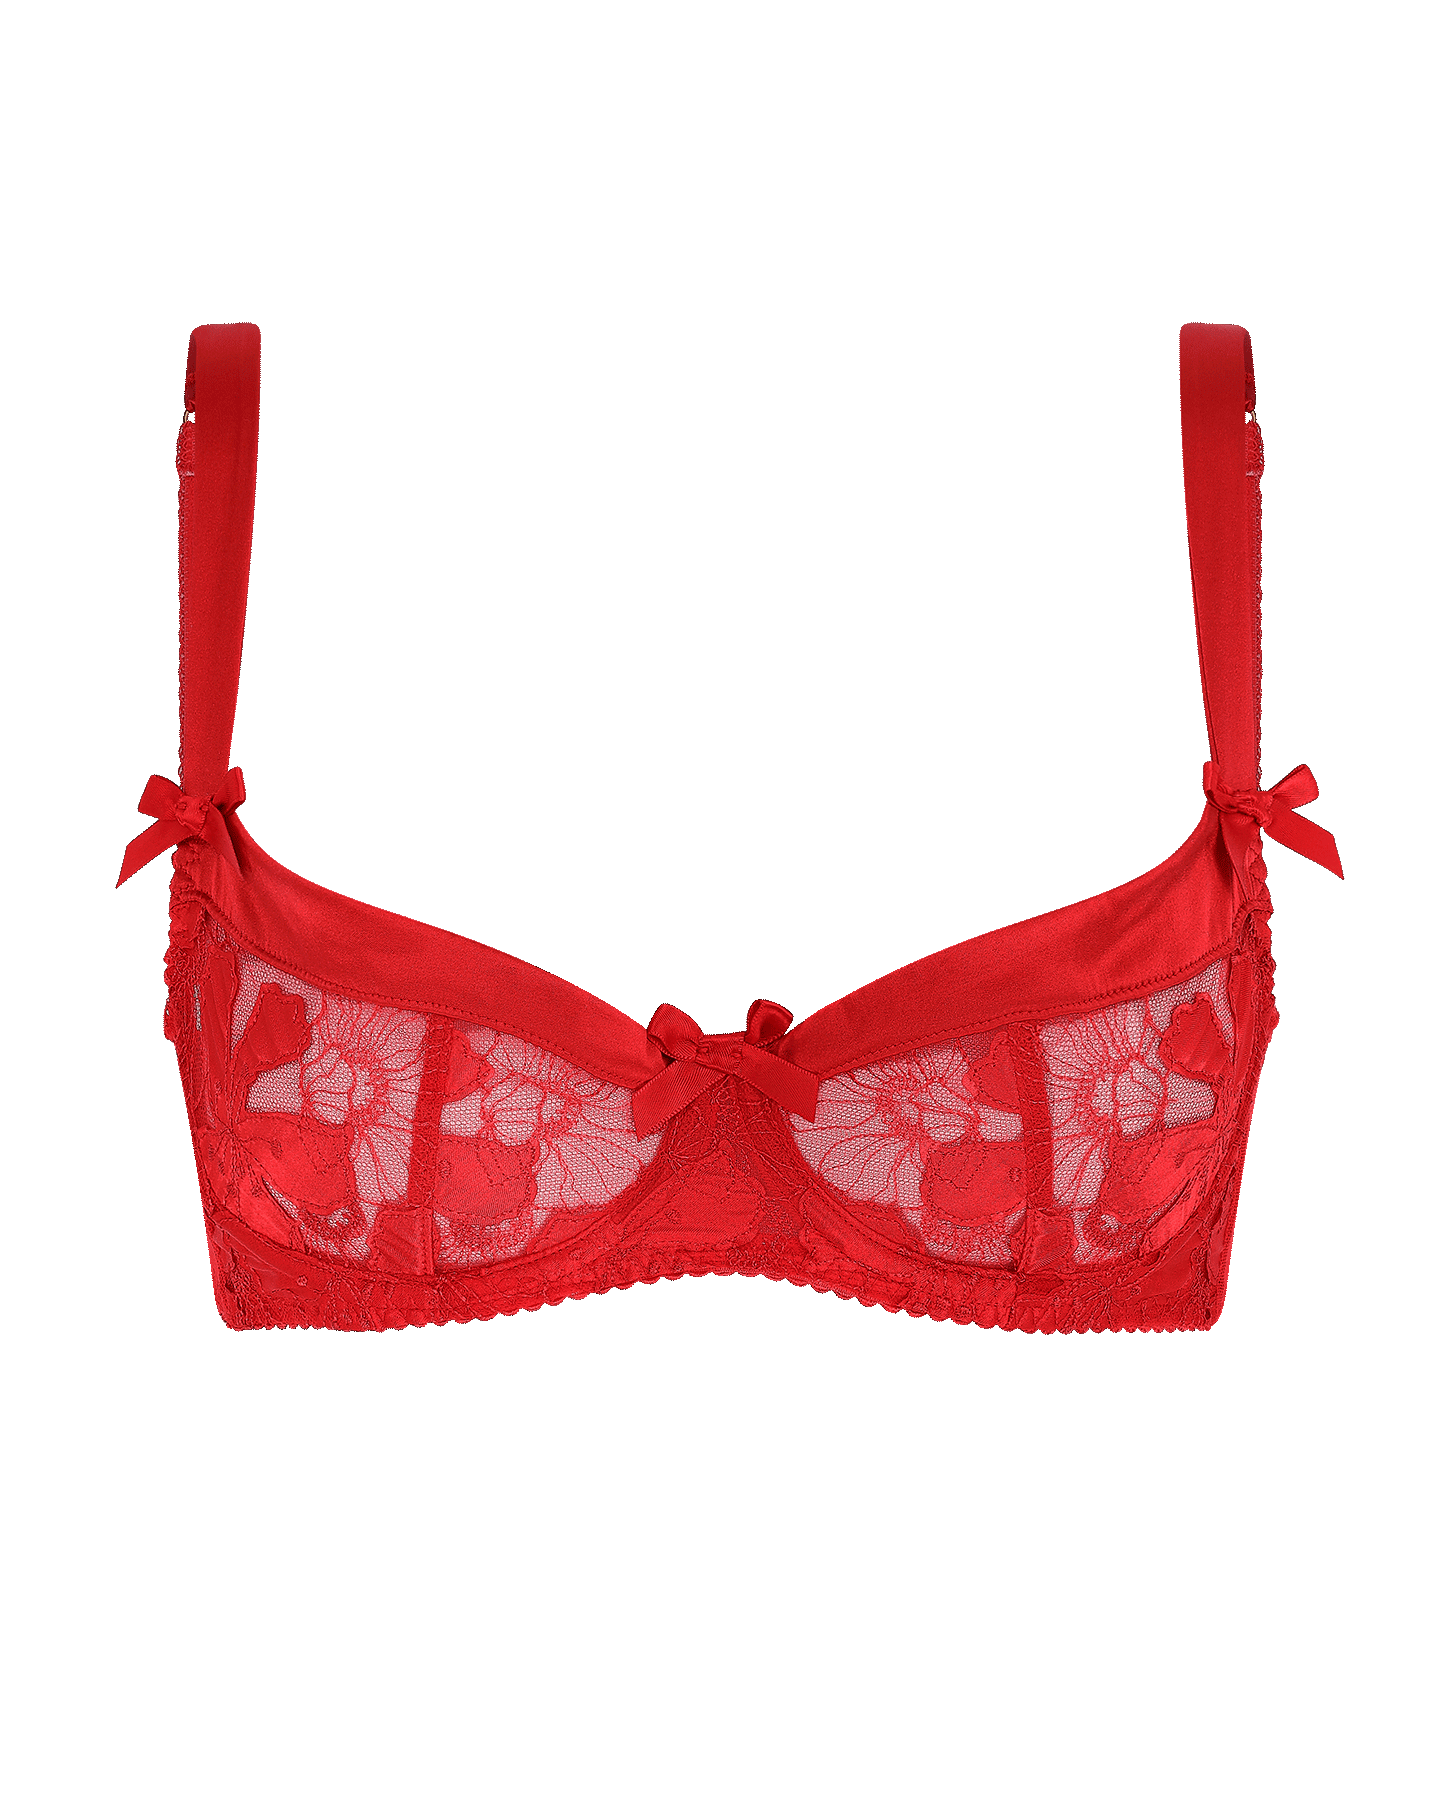 Adore Me Women's Colete Balconette Bra 38d / Printed Lace C06 Red. : Target